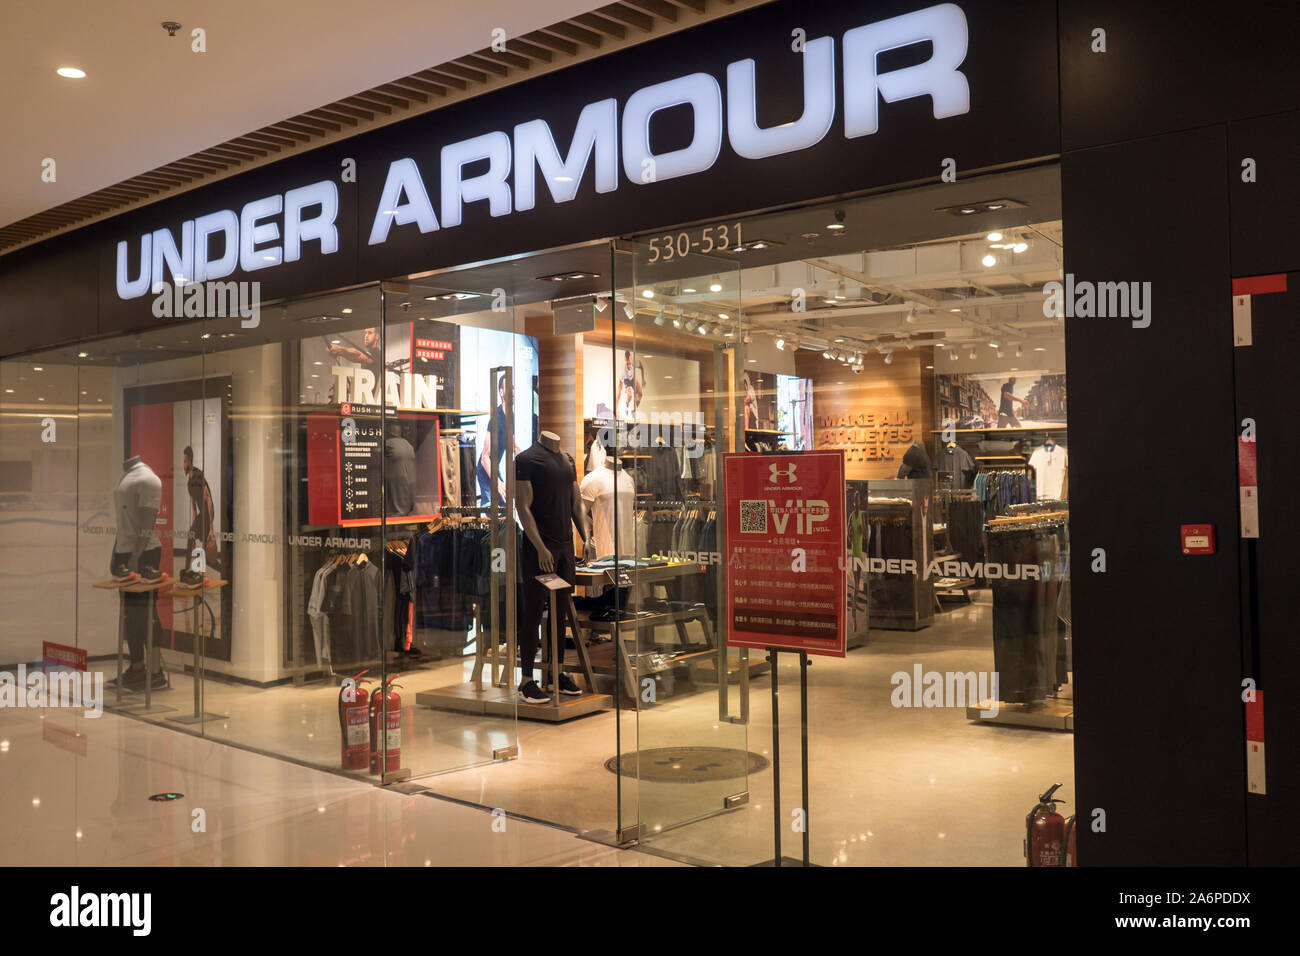 under armour mall sport